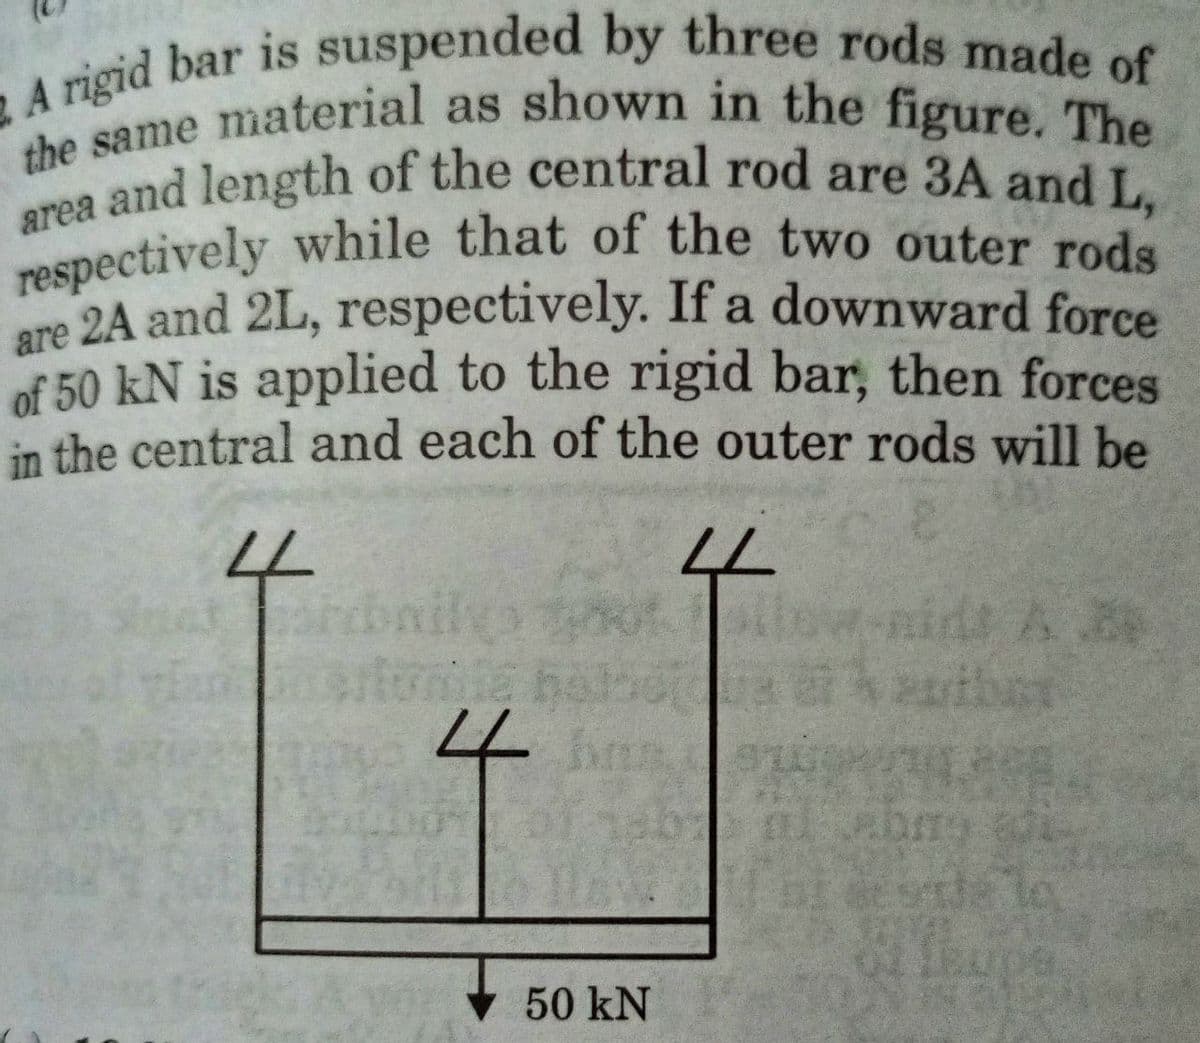 2 A rigid bar is suspended by three rods made of
the same material as shown in the figure. The
area and length of the central rod are 3A and L,
respectively while that of the two outer rods
are 2A and 2L, respectively. If a downward force
of 50 kN is applied to the rigid bar, then forces
in the central and each of the outer rods will be
LL
4
arba
Frite h
50 kN